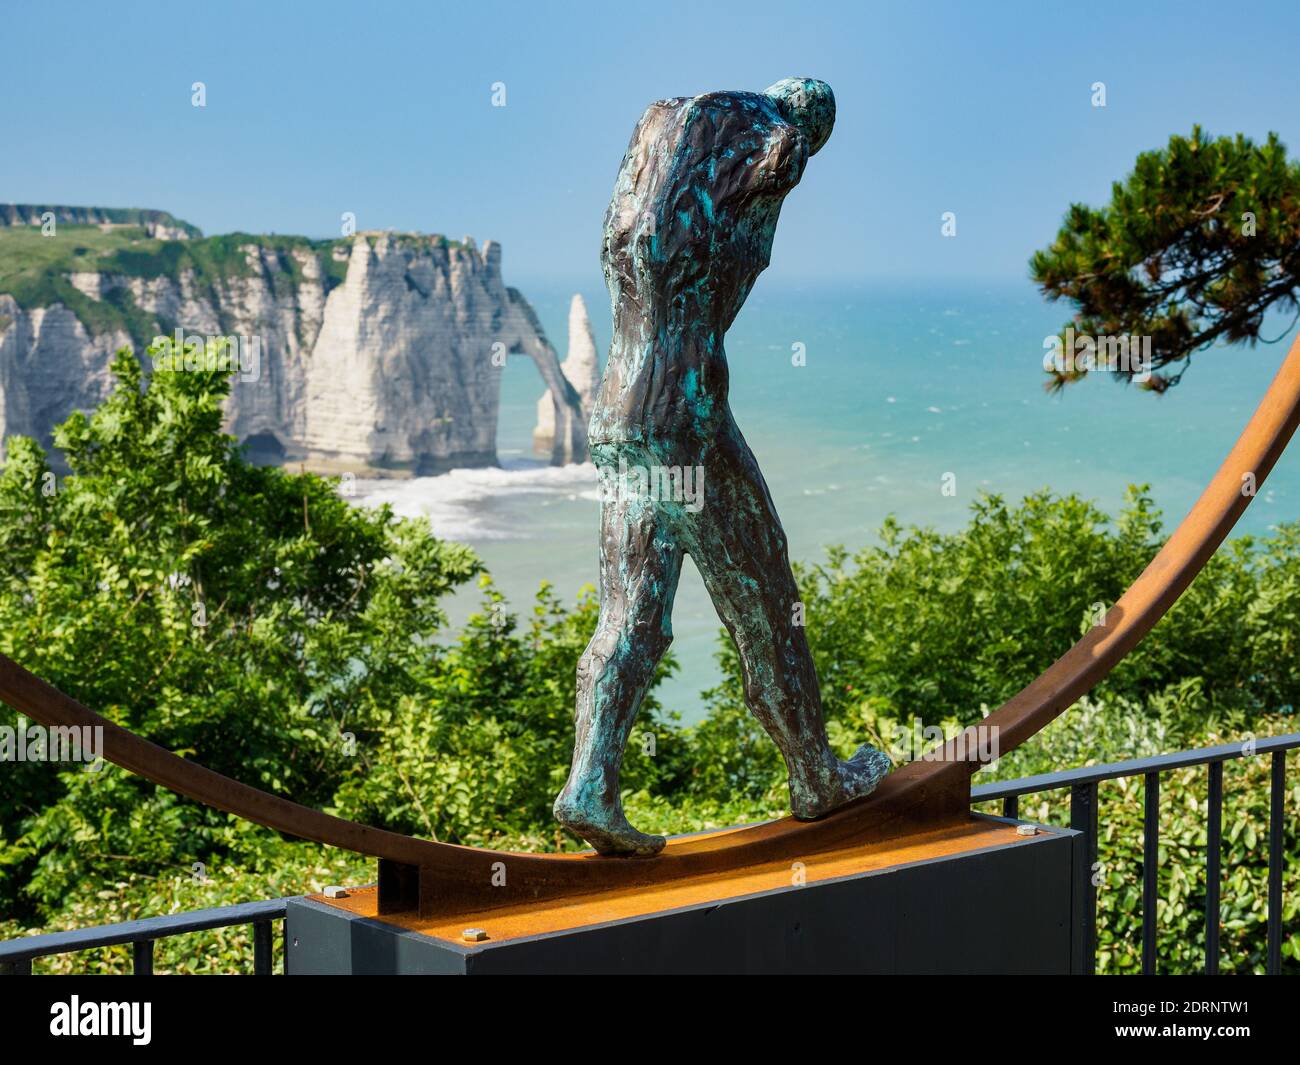 Les Jardins d’Etretat is a neo-futuristic garden that extends over the cliffs of the Alabaster Coast, Normandy, France Stock Photo